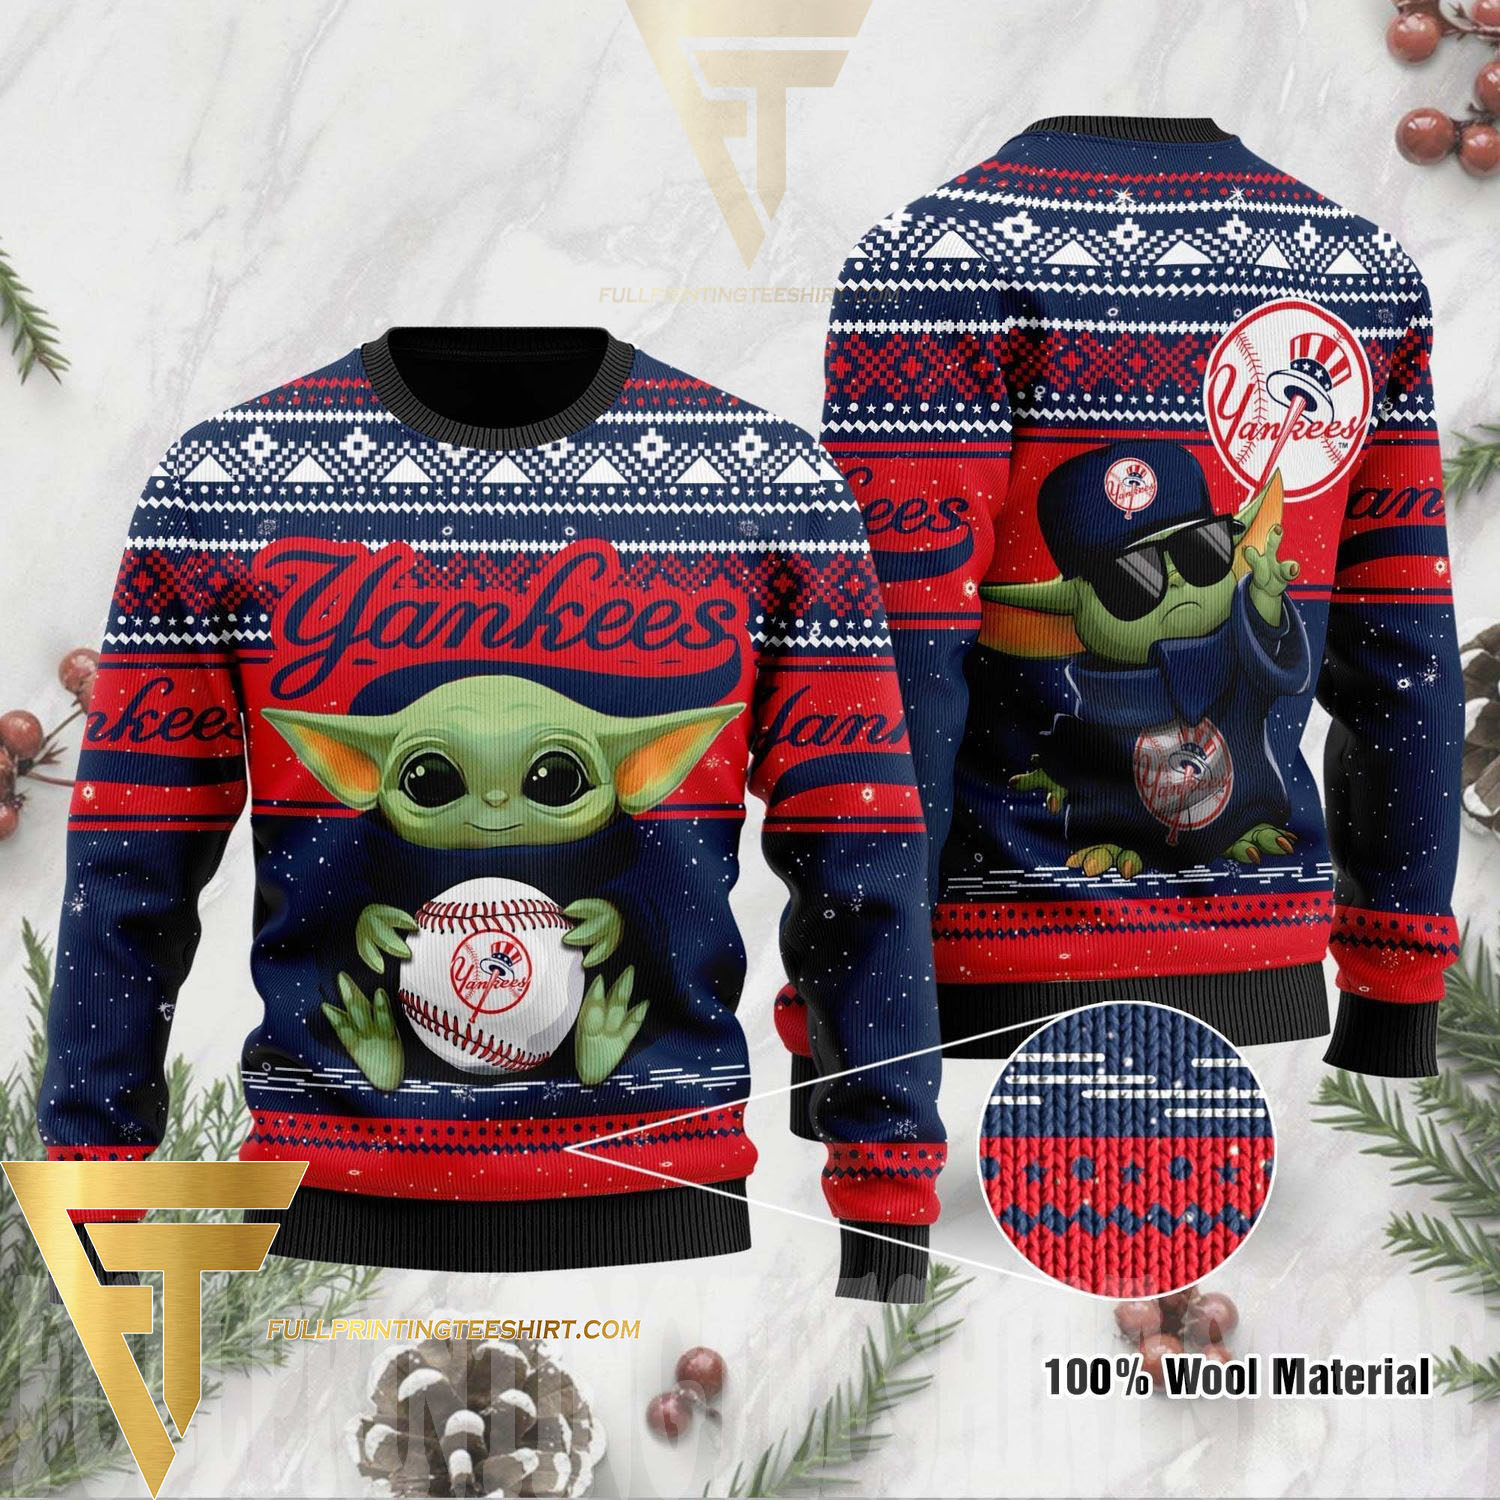 Top-selling item] New York Rangers Knitting Pattern Ugly Christmas Sweater